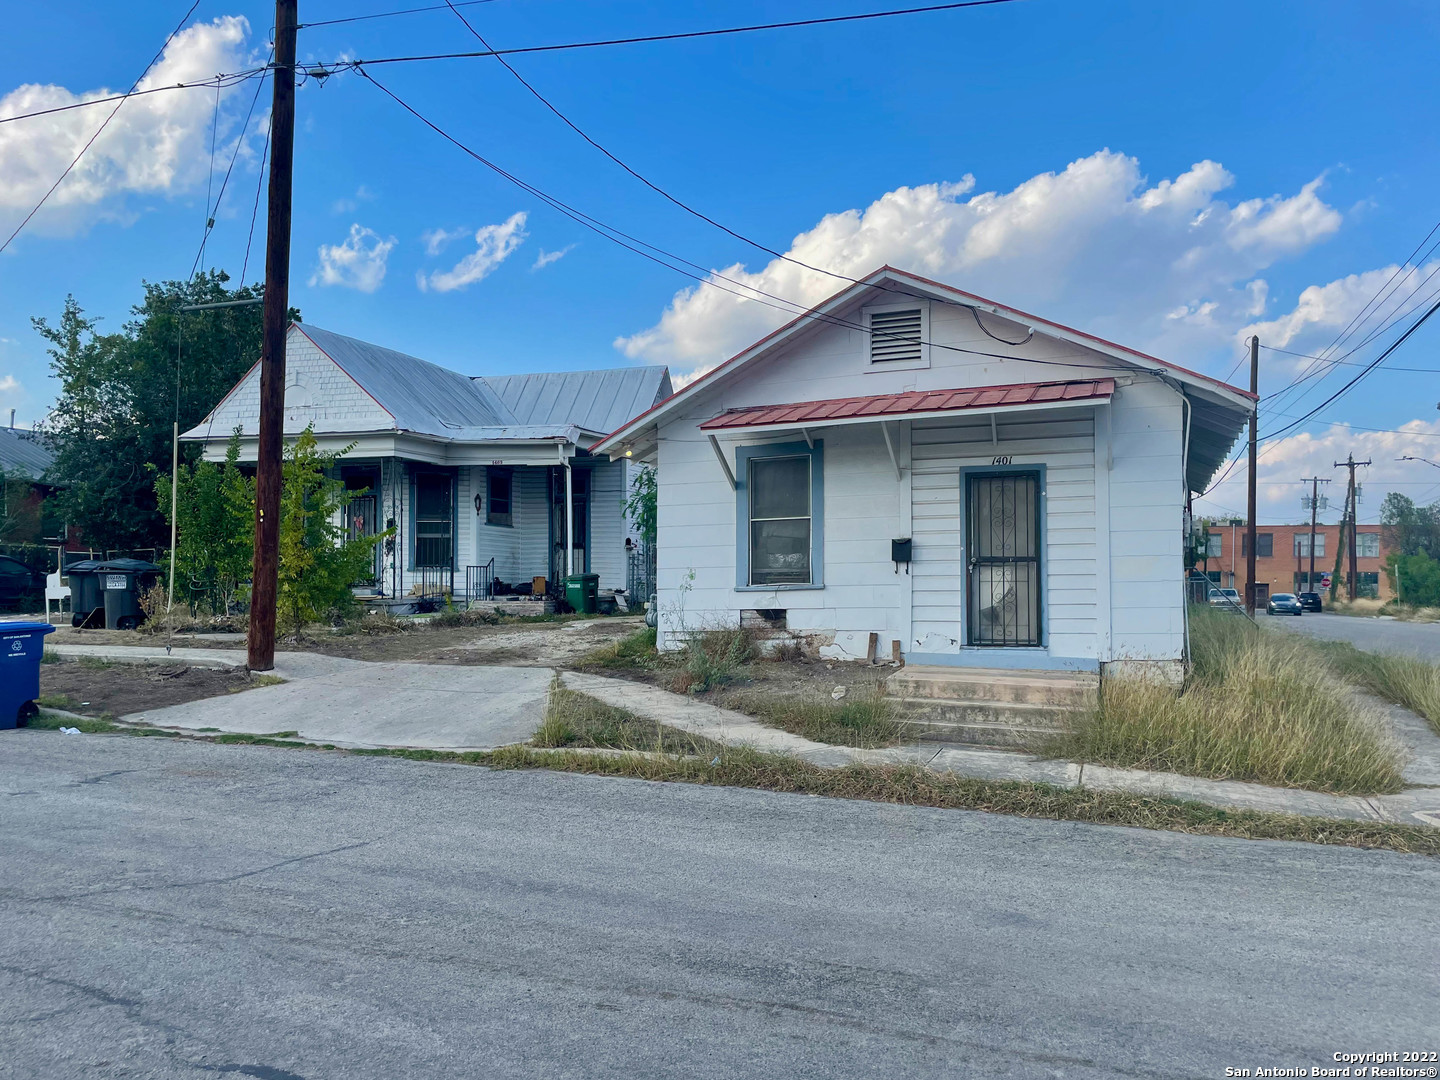 2 Lots, one corner, with 3 homes available near Alazan Creek. Convenient location with quick access to Downtown San Antonio, UTSA Downtown, Lanier High School and more.